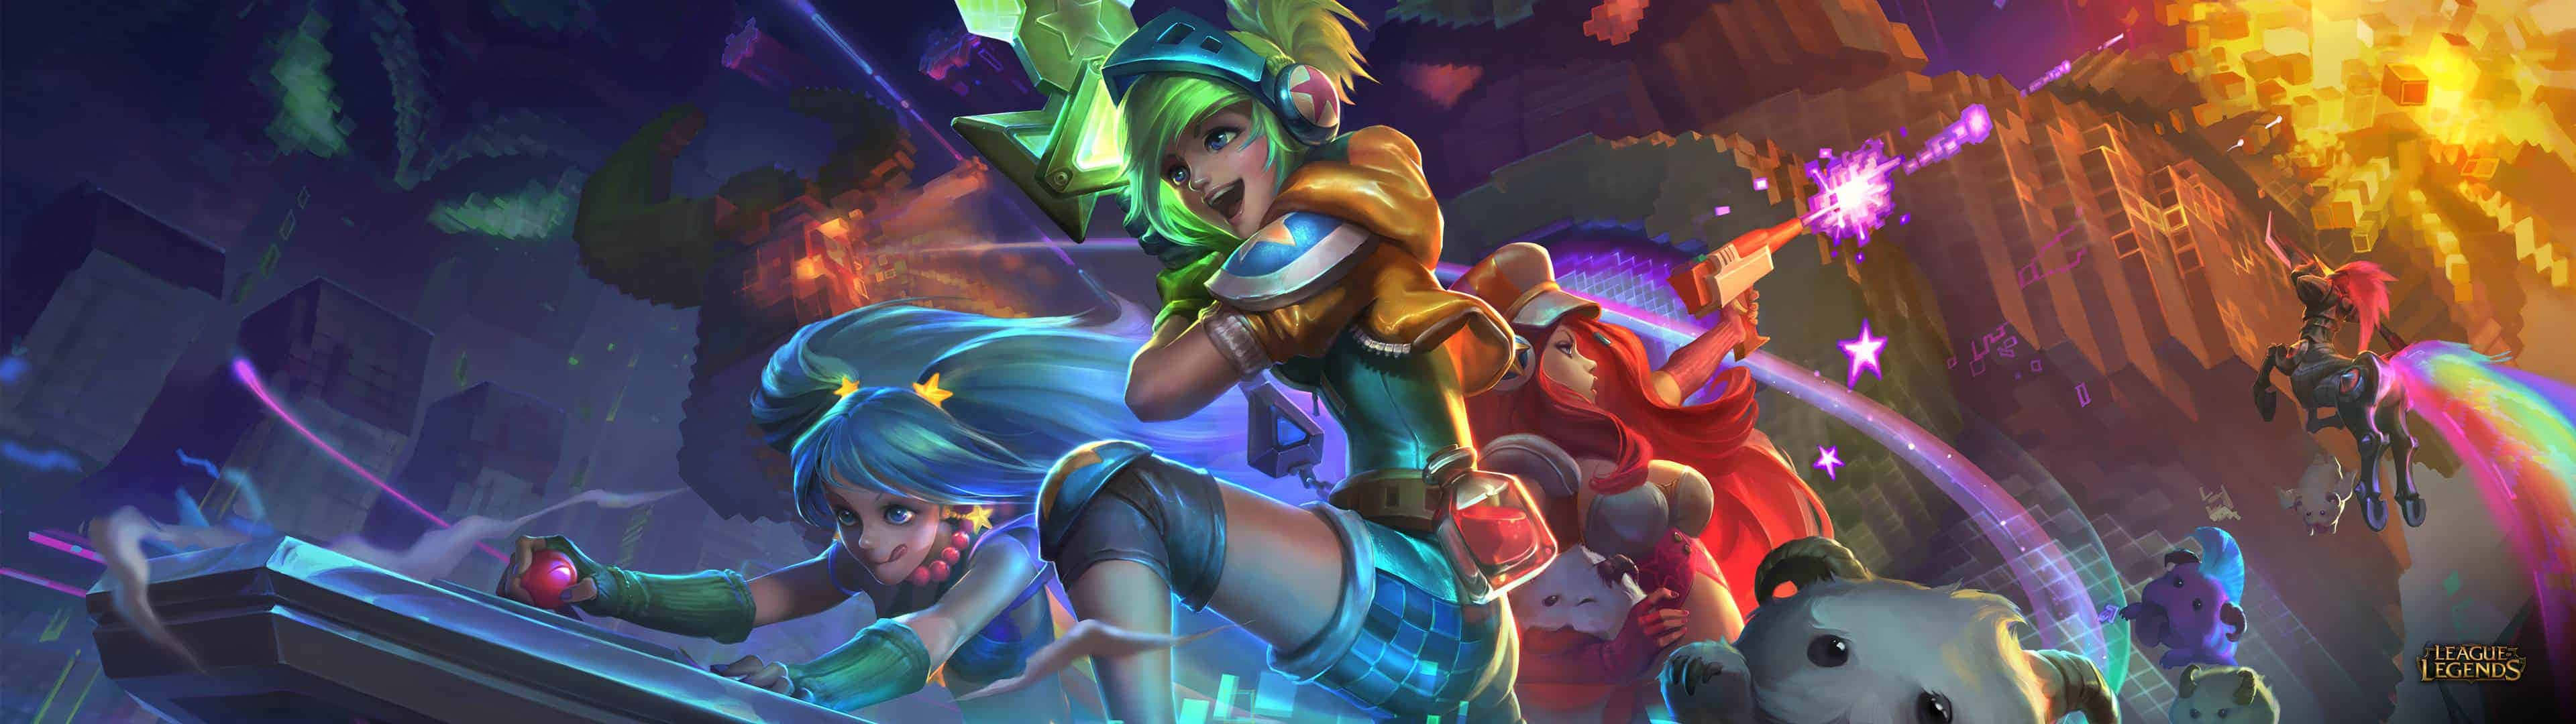 League of Legends: Feel the Power of Immersive, High-Definition Gaming Wallpaper